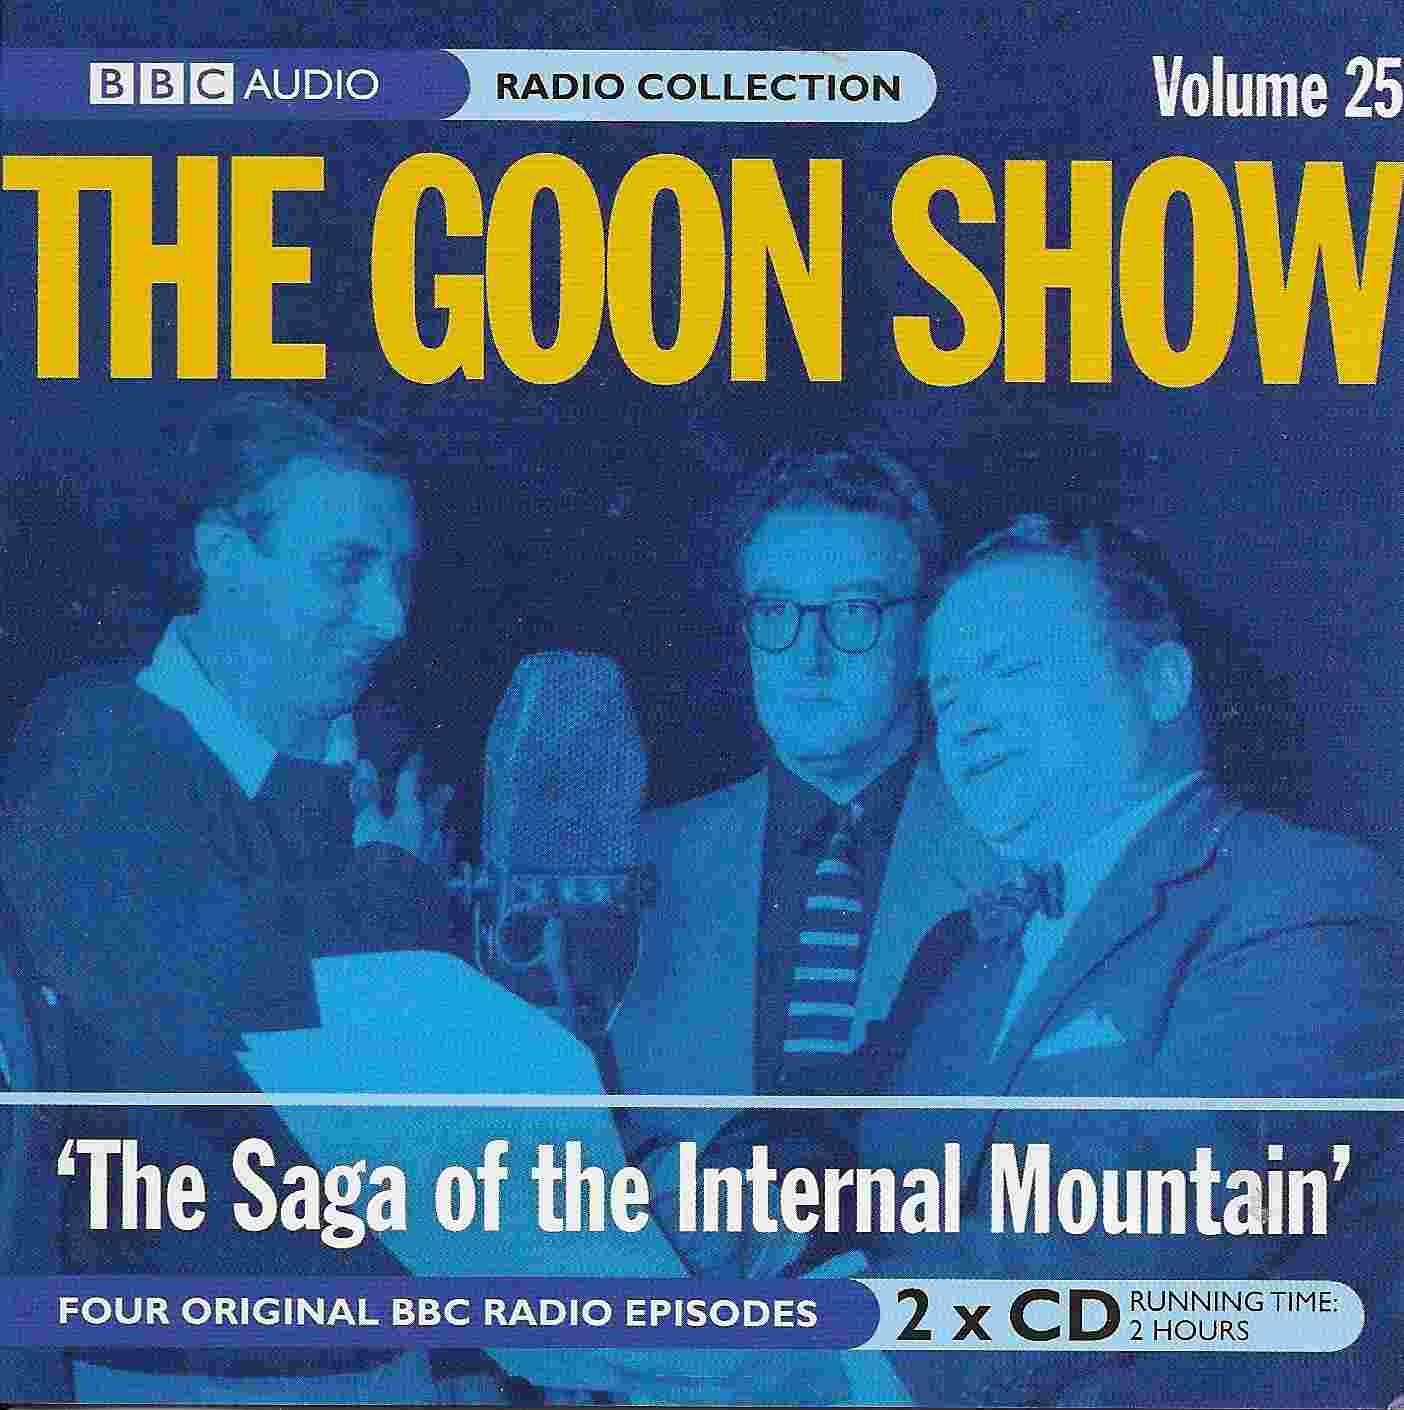 Picture of ISBN 978-1-4056-7772-1 The Goon show 25 - The saga of the internal mountain by artist Spike Milligan / Eric Sykes from the BBC cds - Records and Tapes library